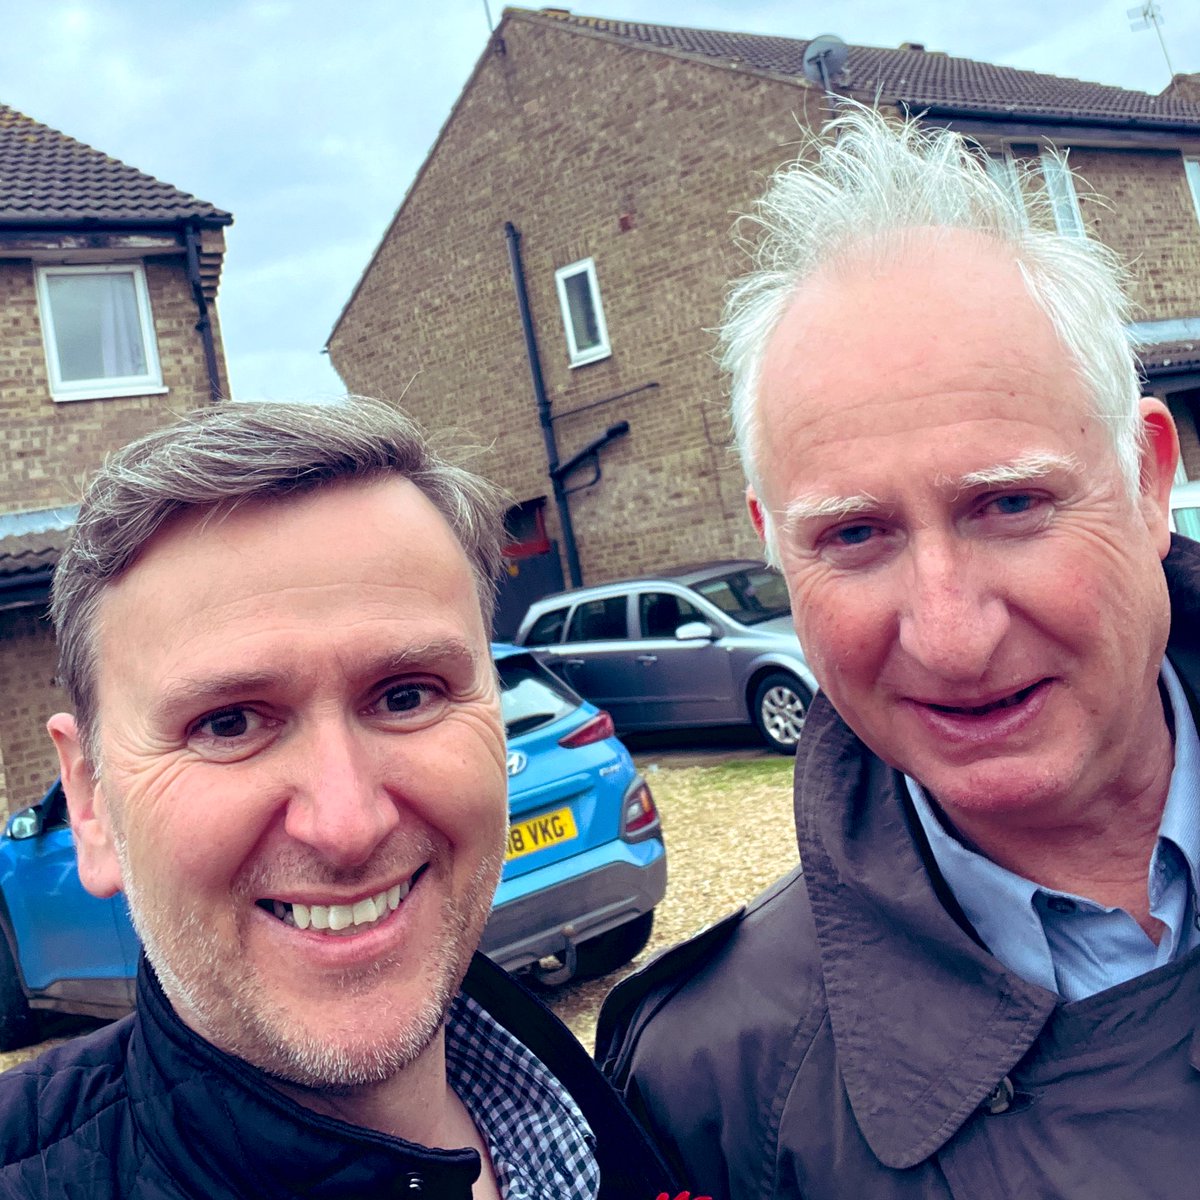 Great to have @DanielZeichner joining us on the campaign trail today. I’m out every day chatting to people about the change we need in Peterborough. And fighting for the future families need #VoteLabour #ChangeIsComing